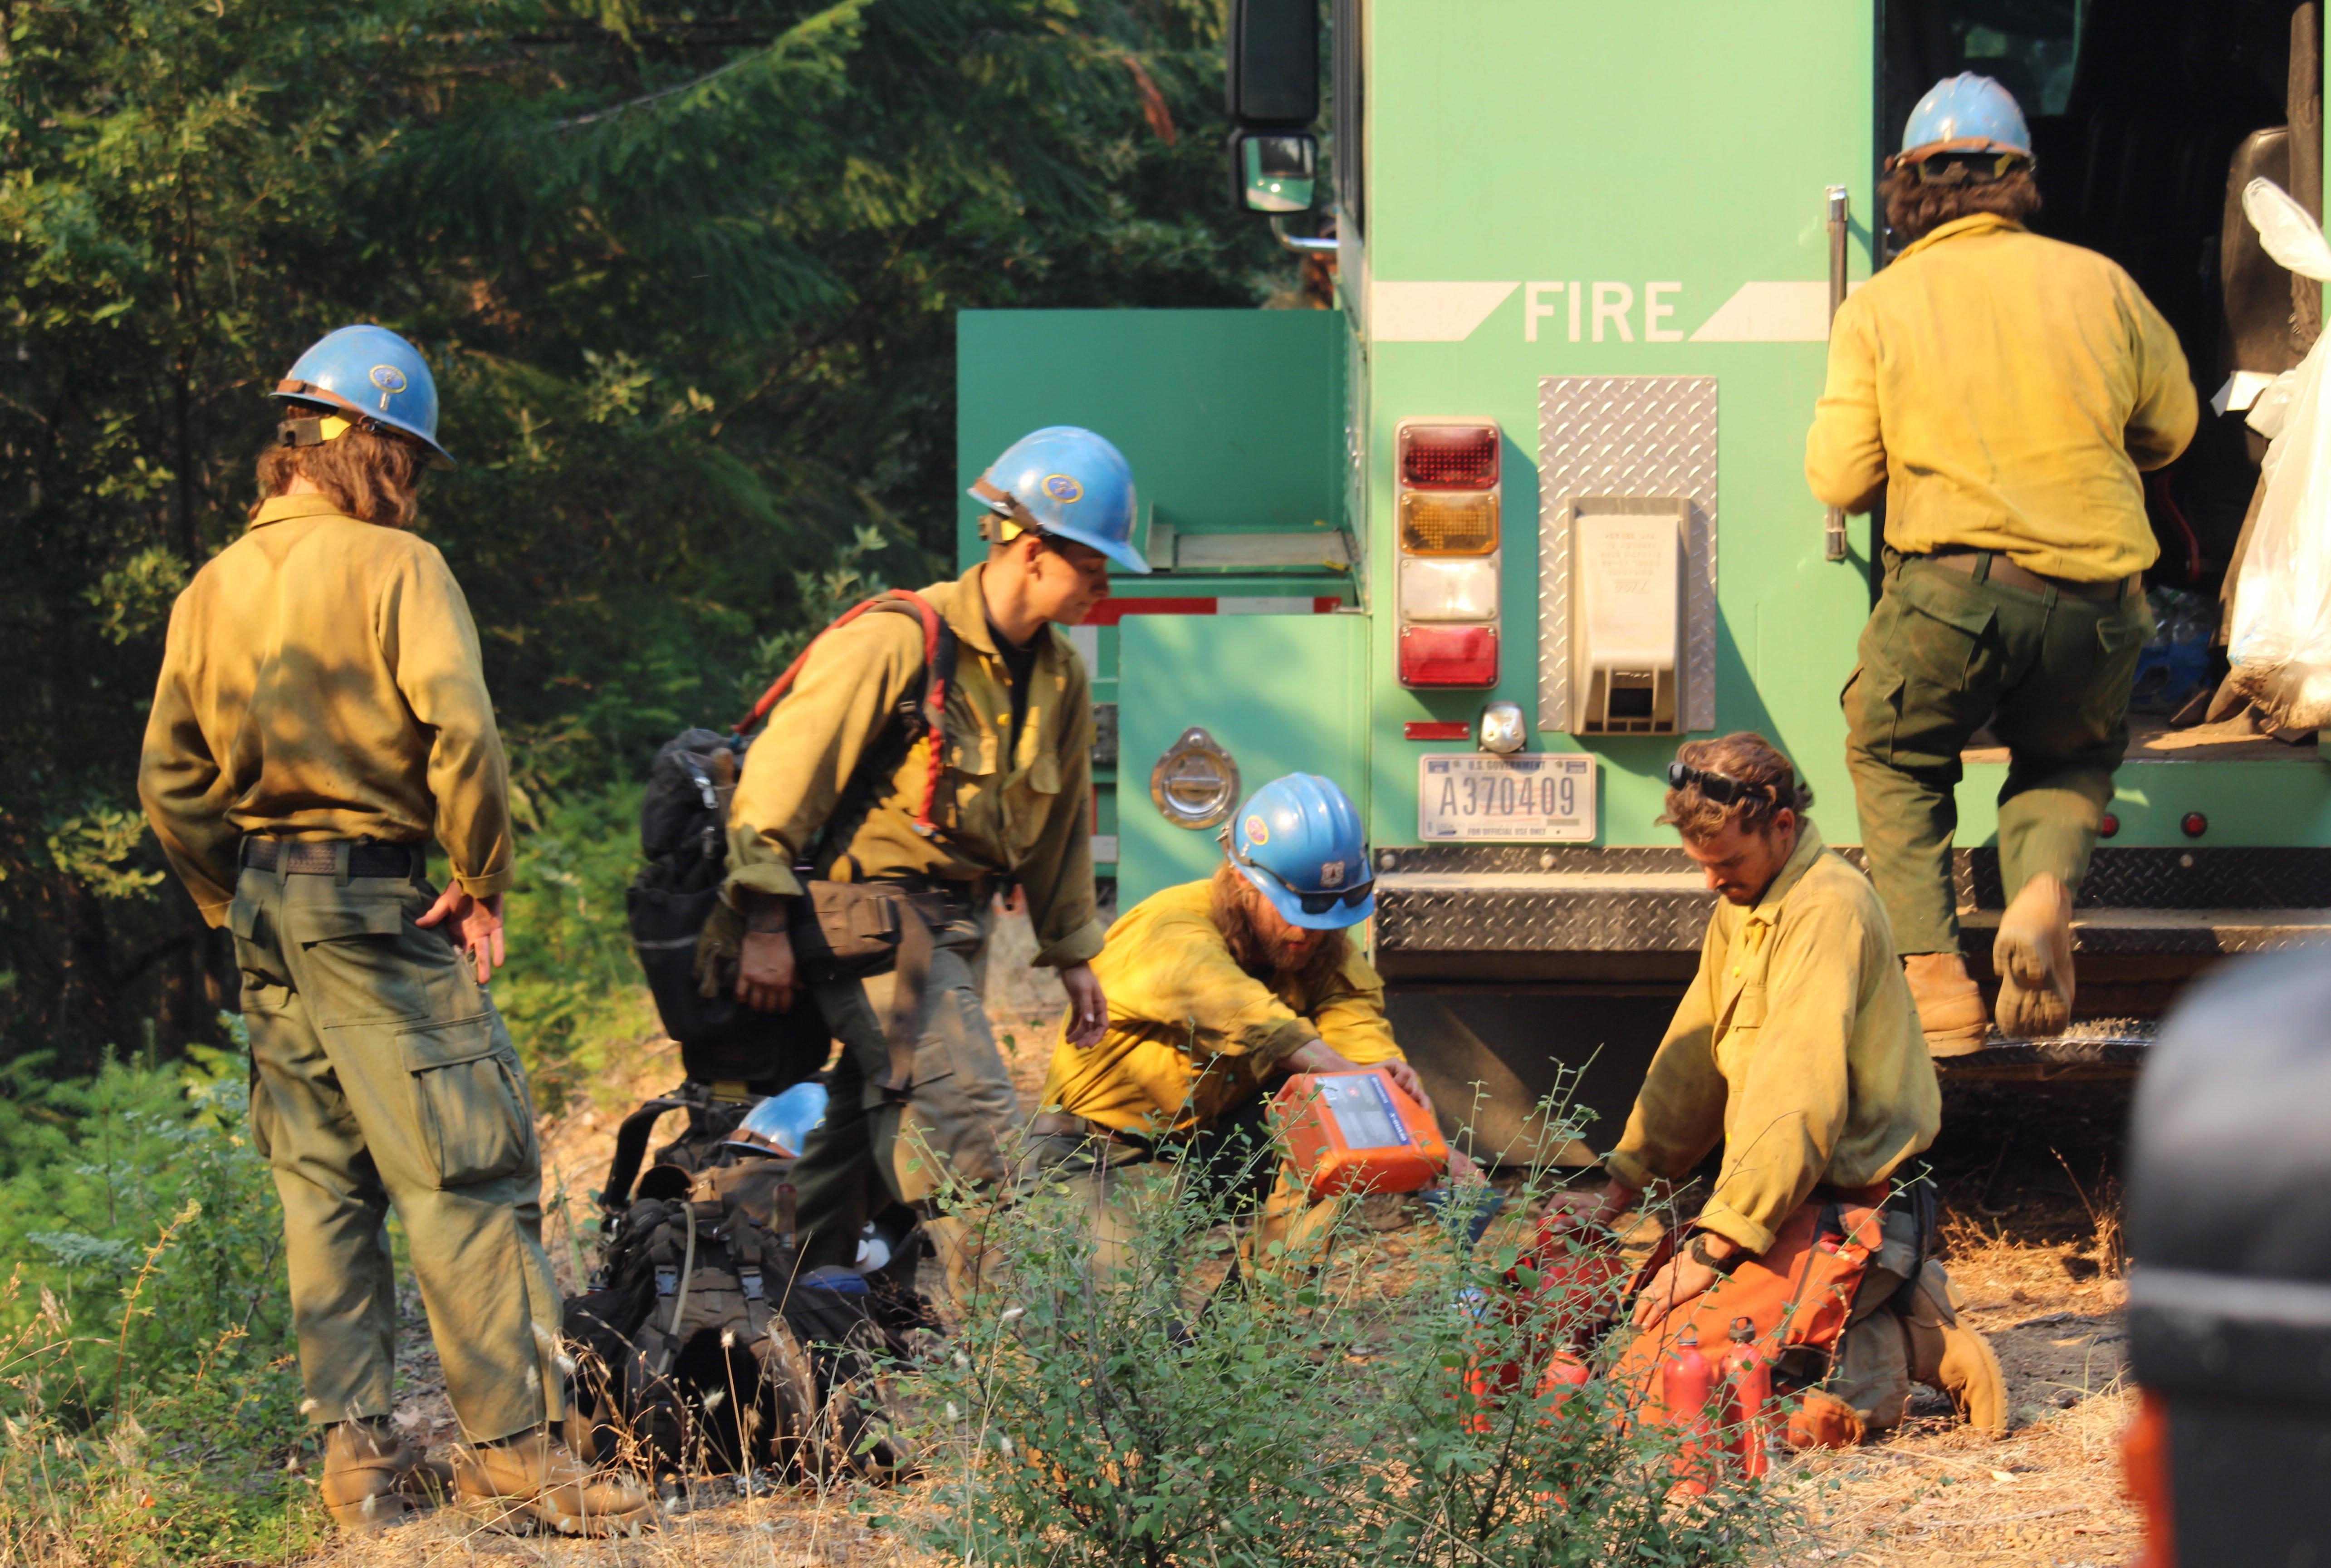 A group of hotshots in wildfire gear and blue helmets packing up various tools and equipment into large green trucks